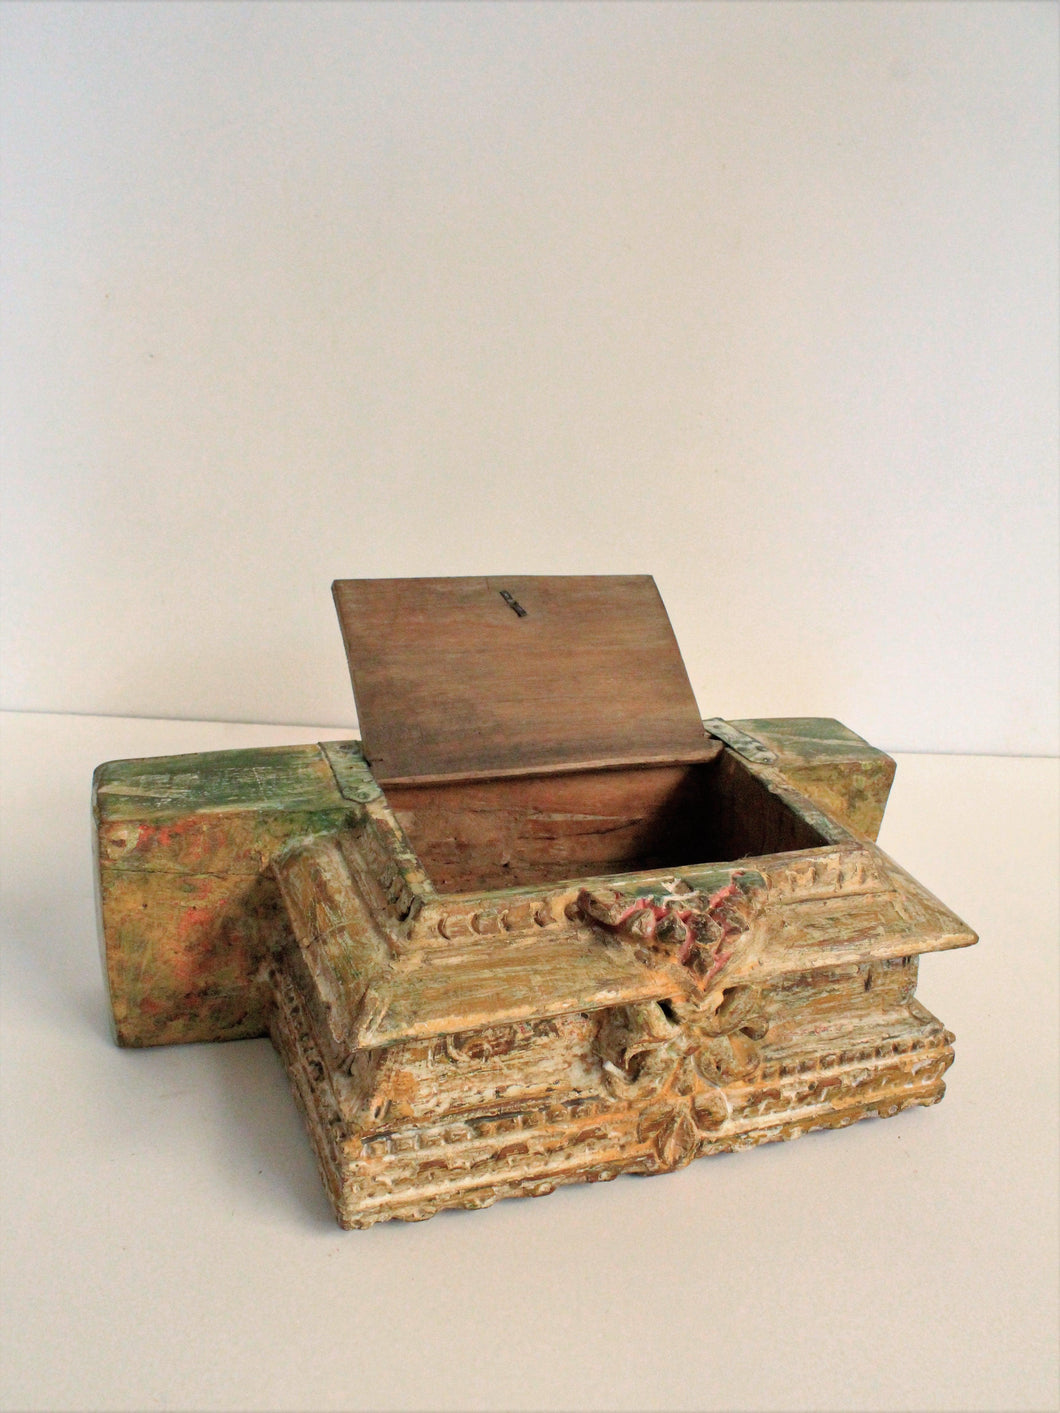 Vintage Wooden Rustic Toda Storage Box - Style It by Hanika